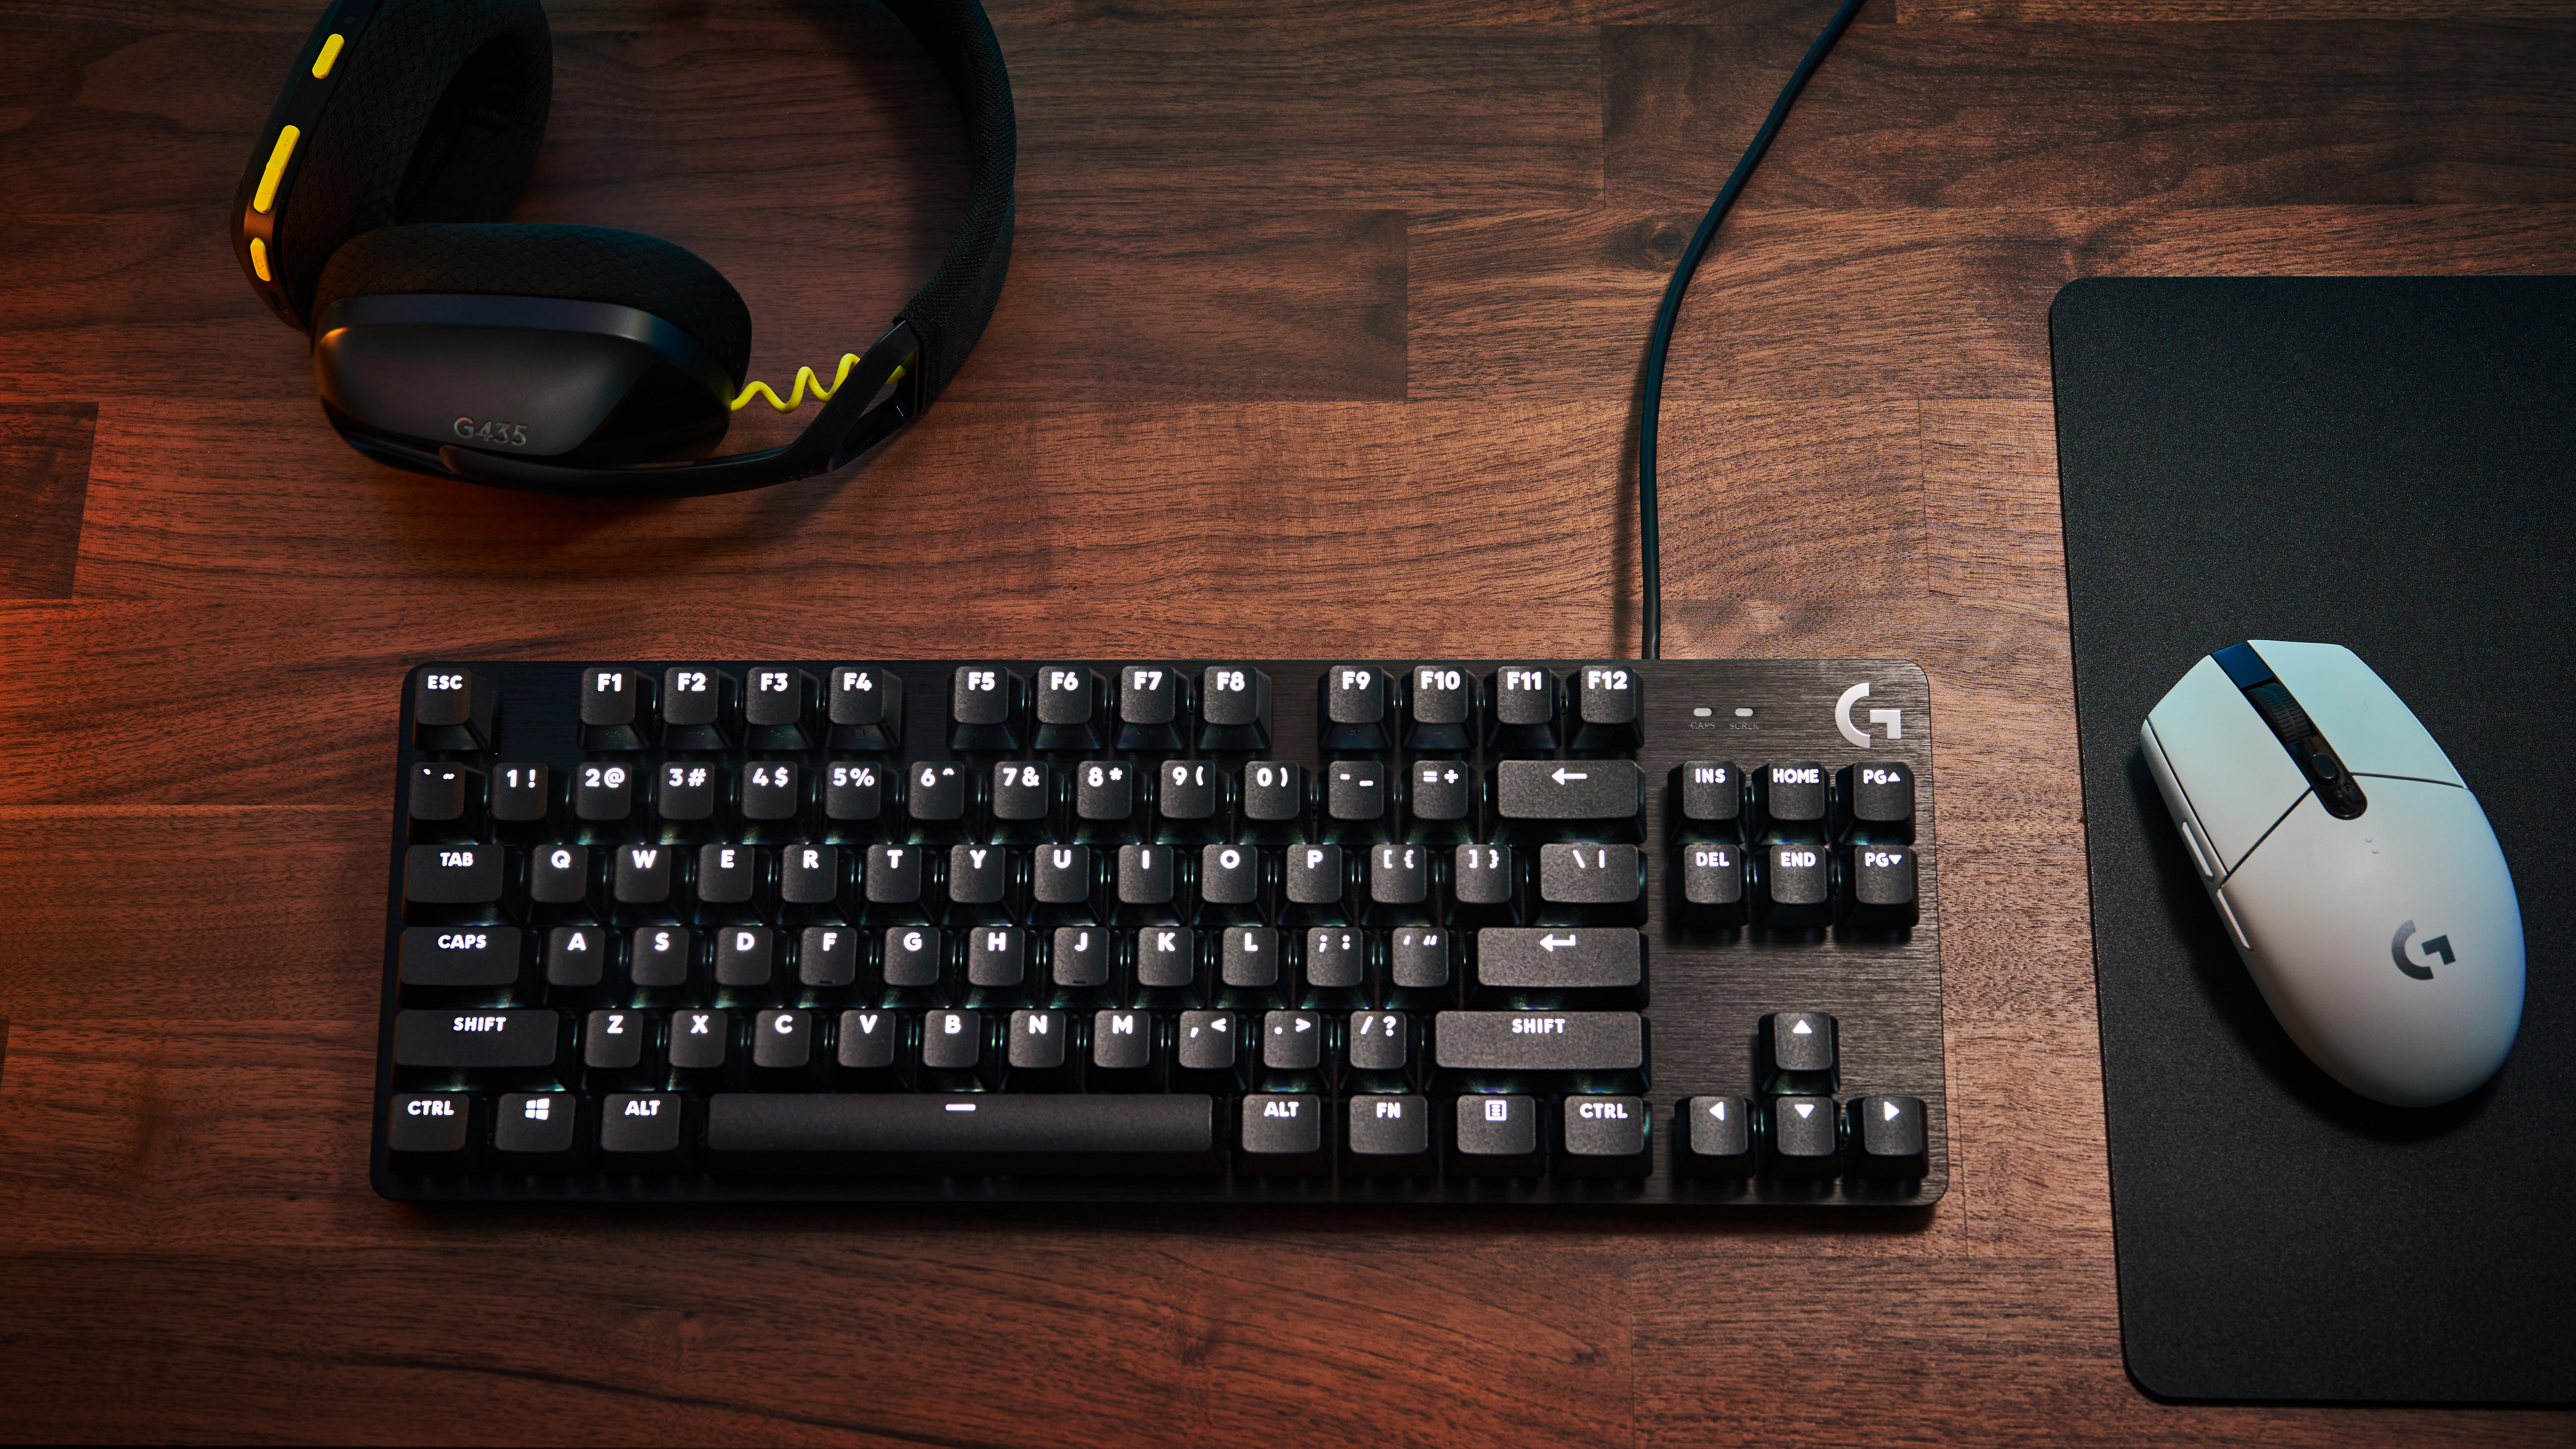 Logitech G413 TKL SE review: an affordable and basic gaming keyboard